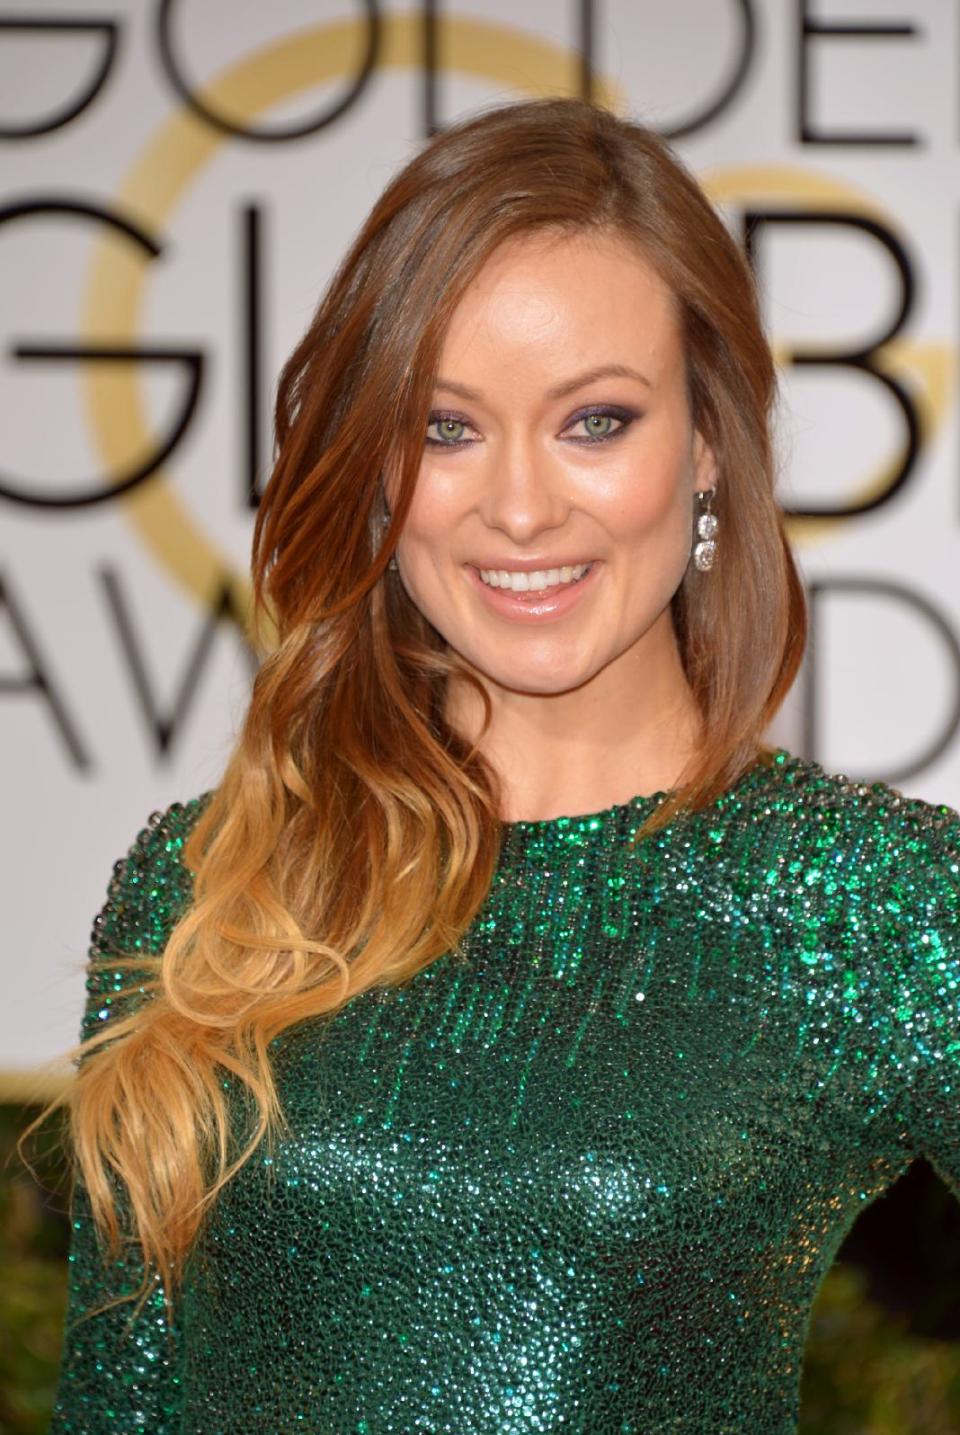 Olivia Wilde arrives at the 71st annual Golden Globe Awards at the Beverly Hilton Hotel on Sunday, Jan. 12, 2014, in Beverly Hills, Calif. (Photo by John Shearer/Invision/AP)